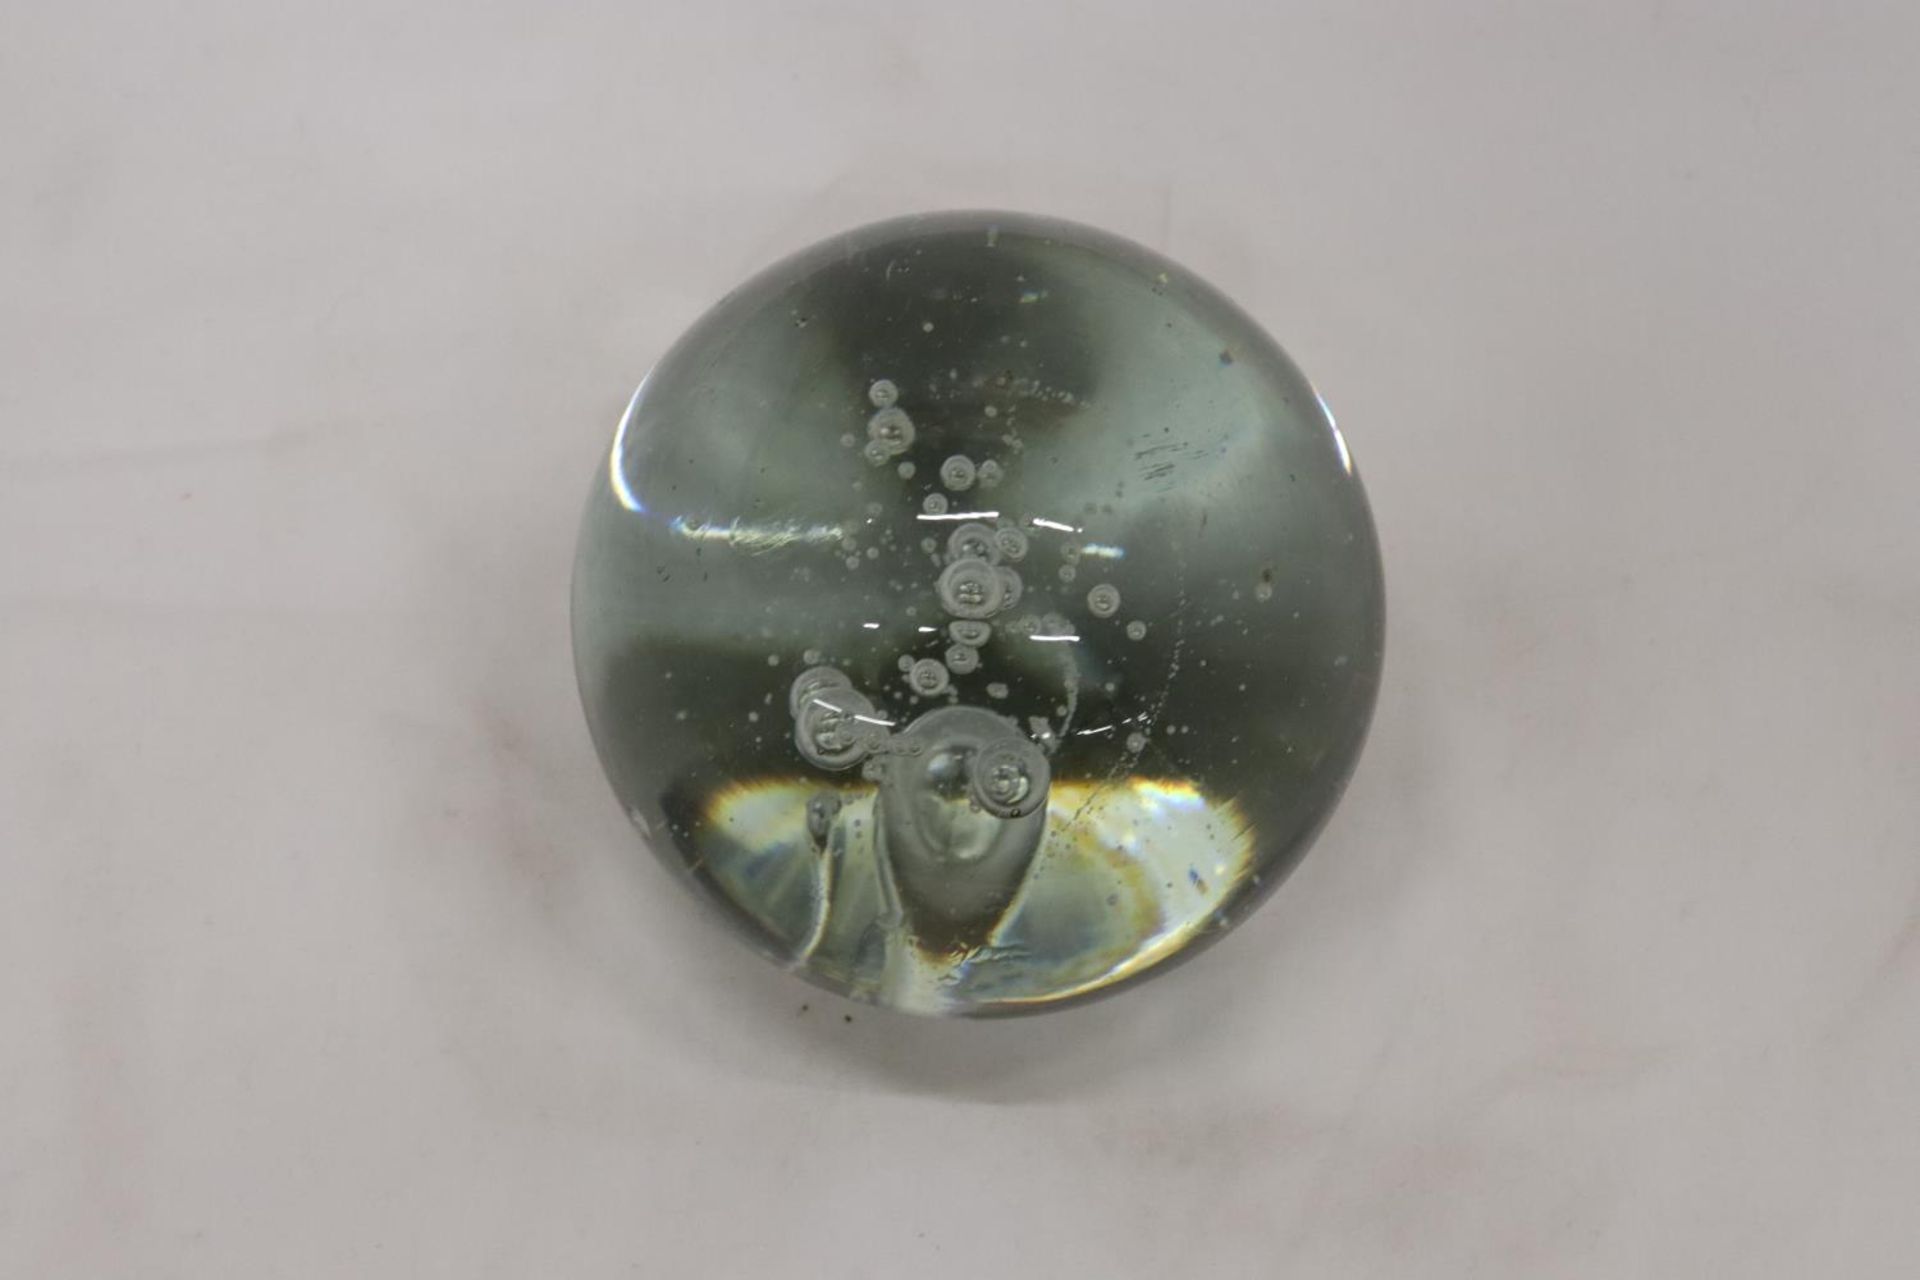 A LARGE VINTAGE GLASS DUMP PAPERWEIGHT - Image 3 of 4